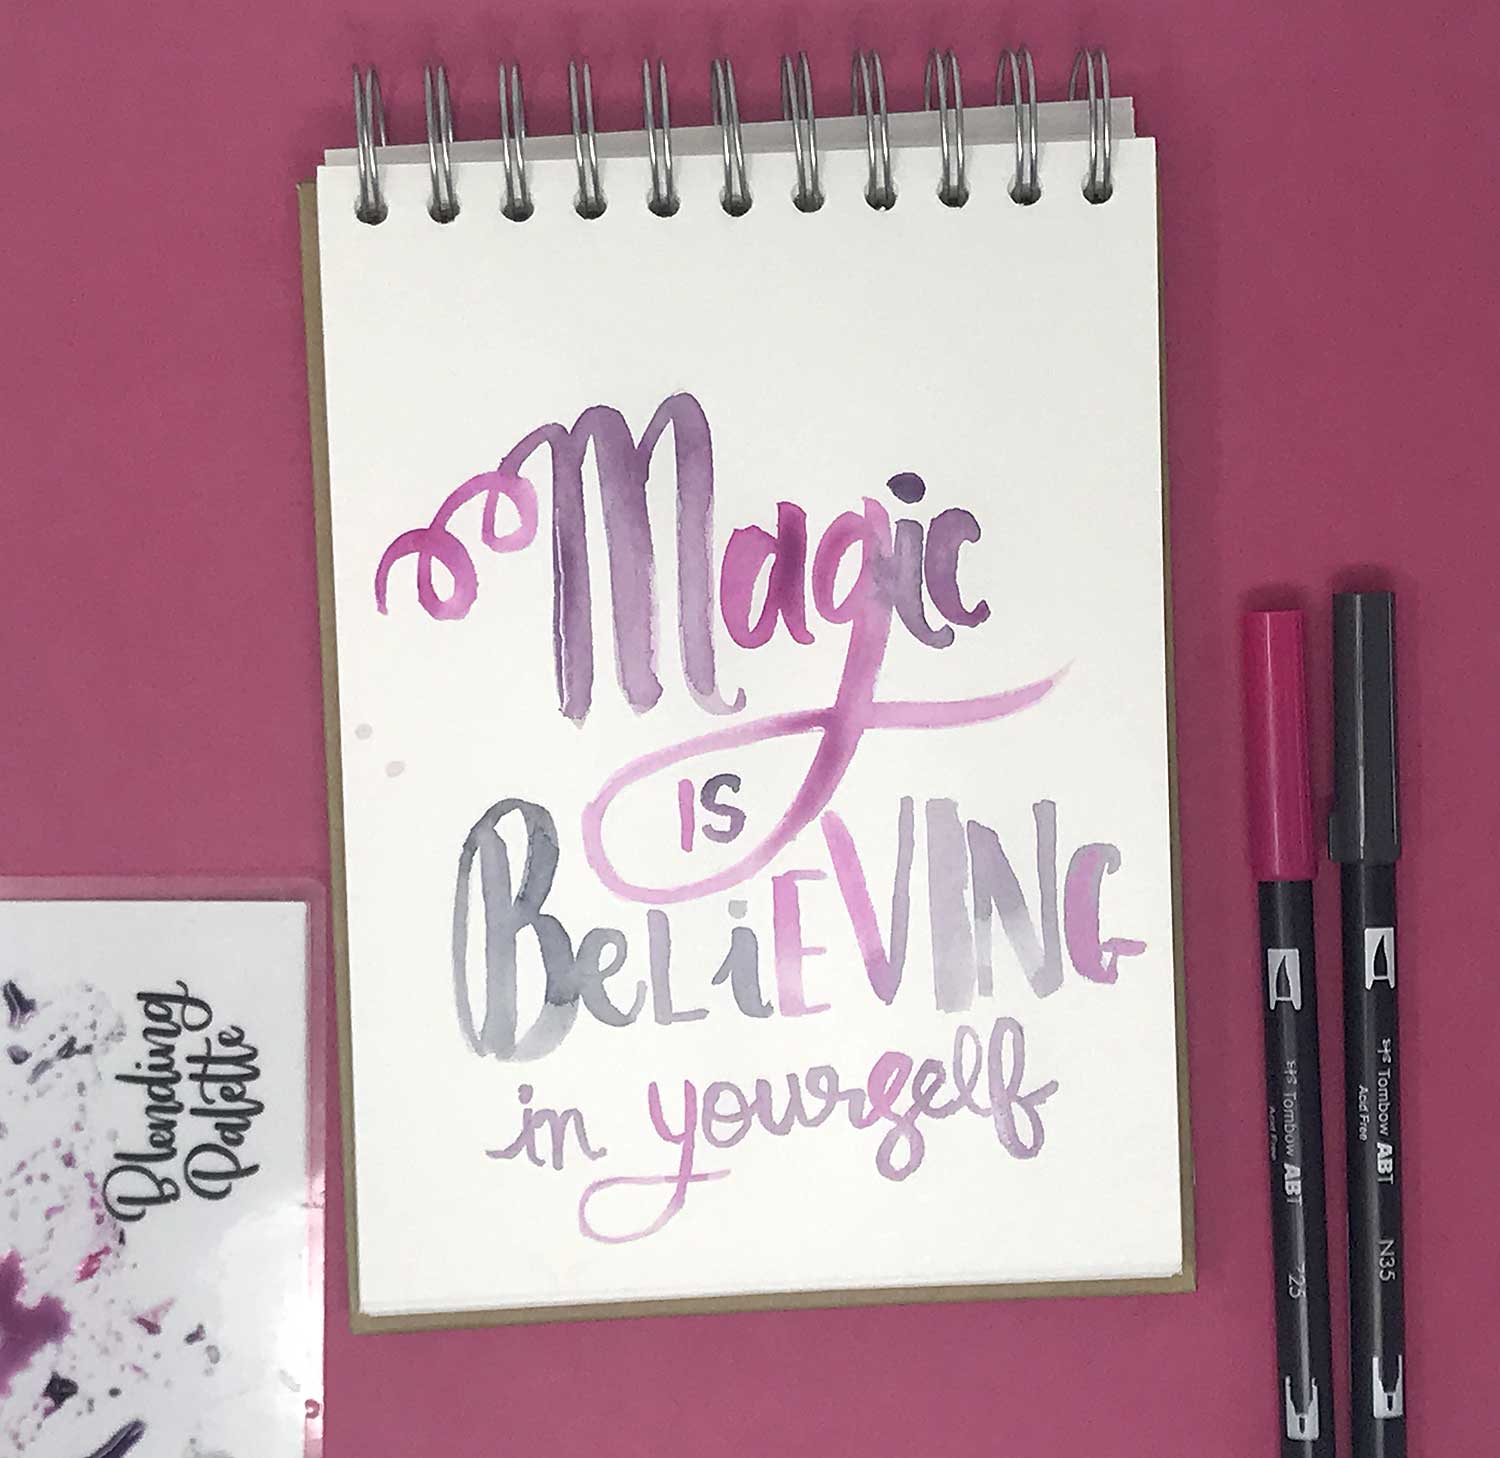 Make a Quote Book for Hand Lettering - Tombow USA Blog